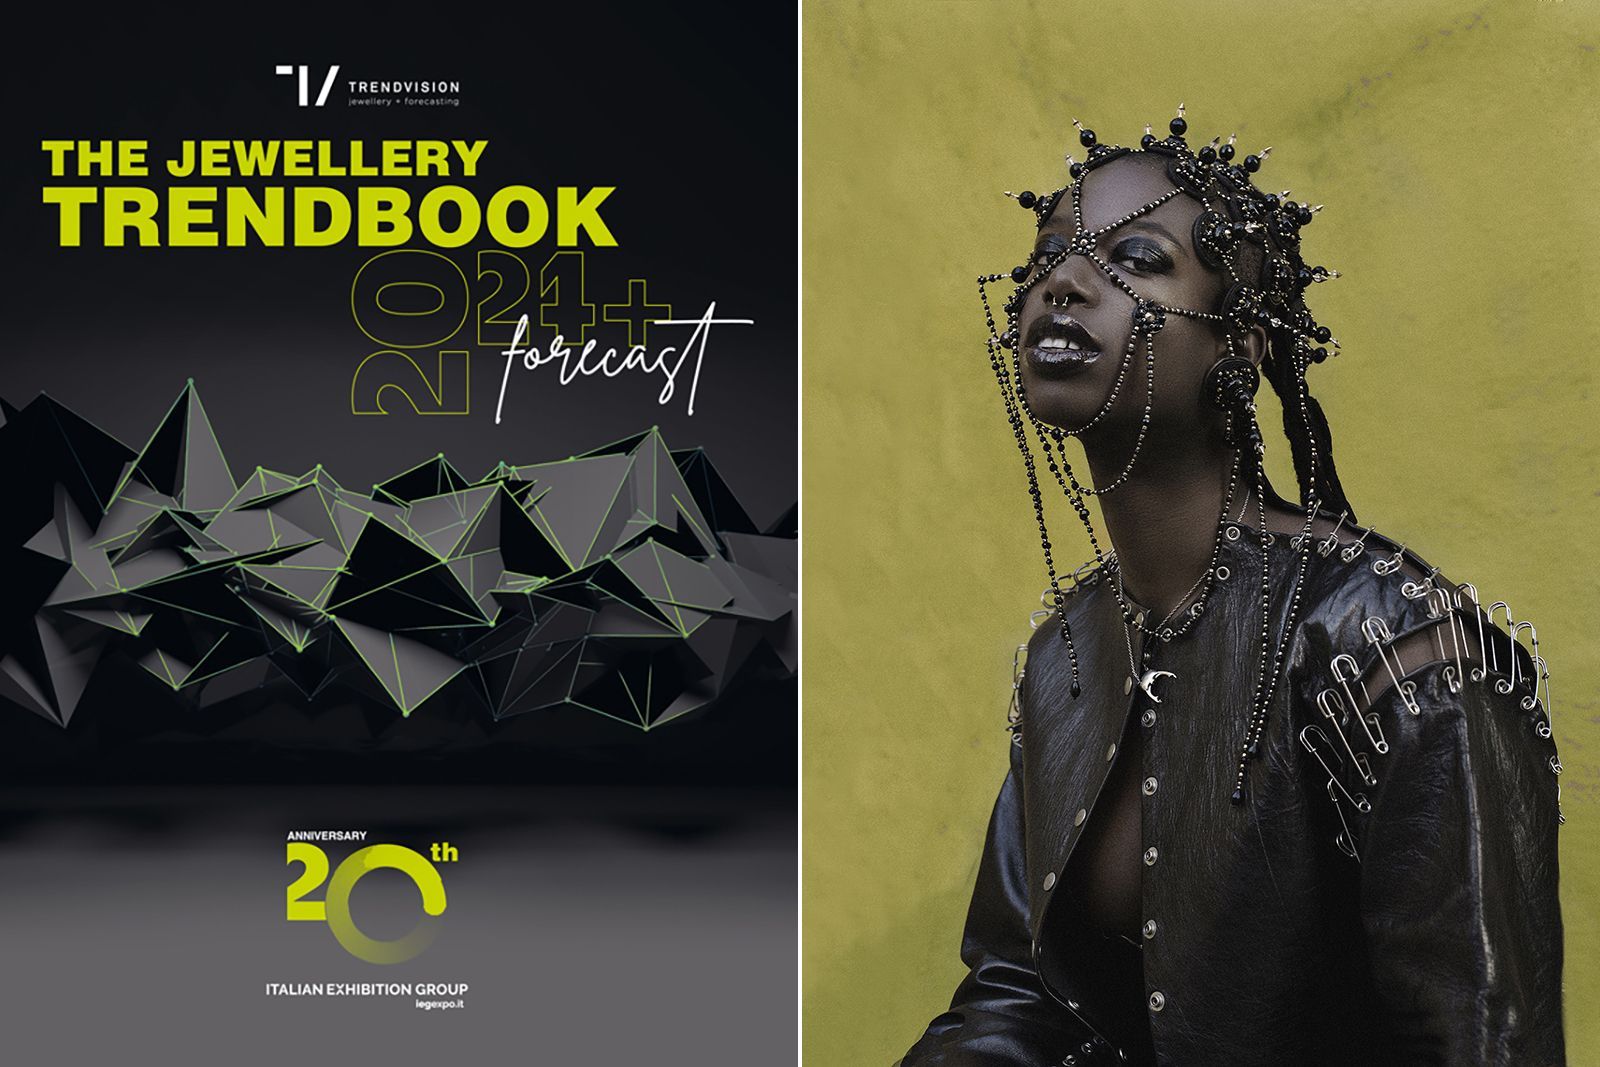 The Jewellery Trendbook 2022 published by the Italian Exhibition Group, along side an image by designer MALAKAI 